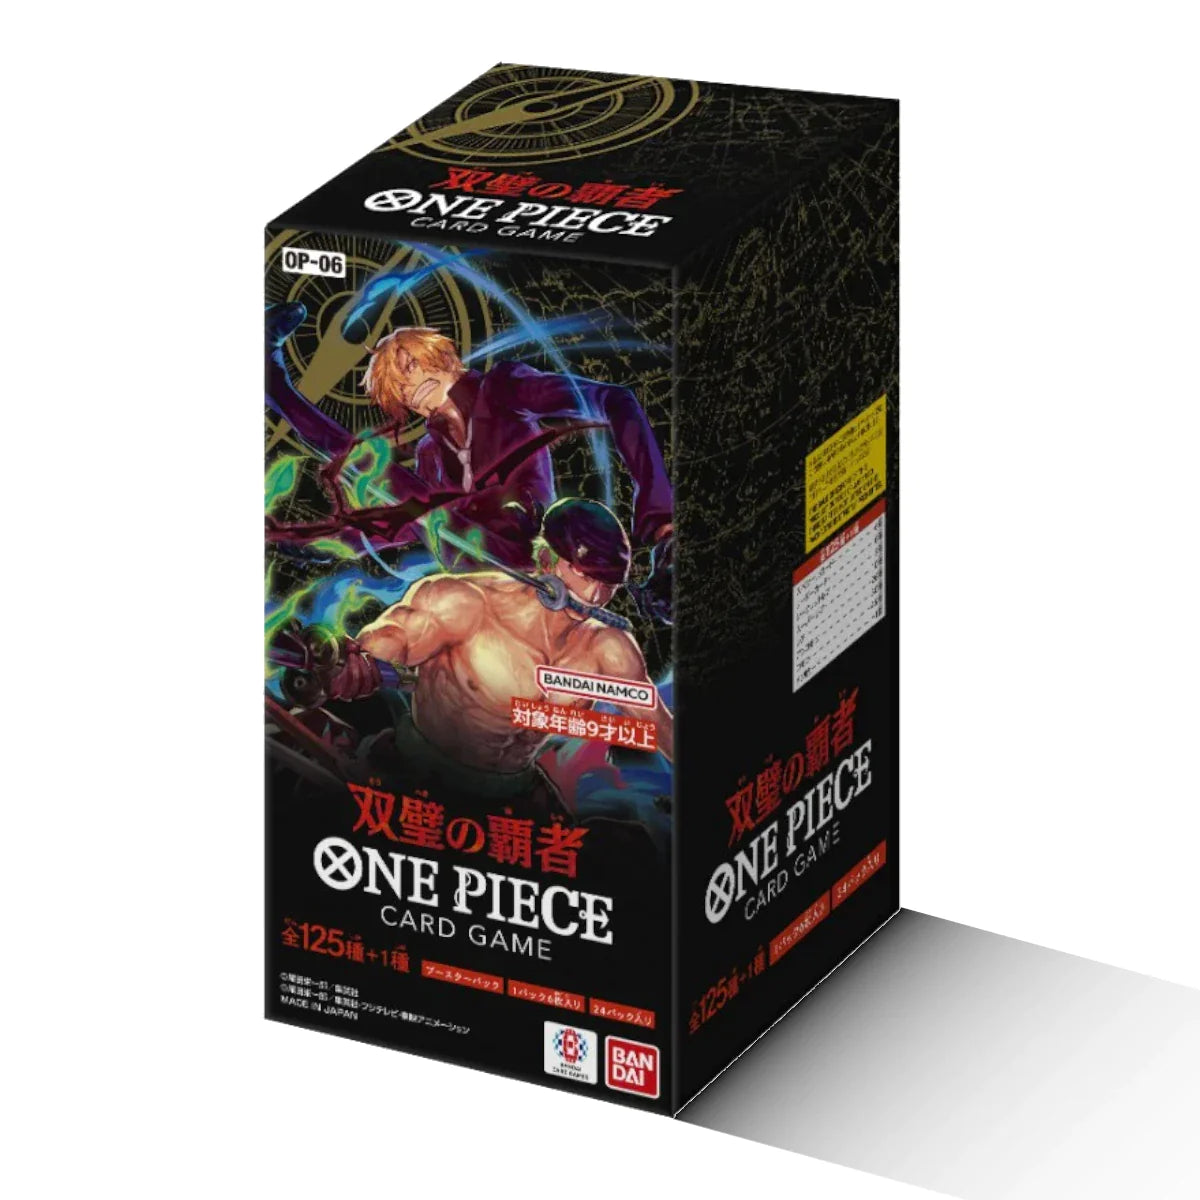 One Piece Twin Champions Booster Pack (双璧の覇者 OP06)